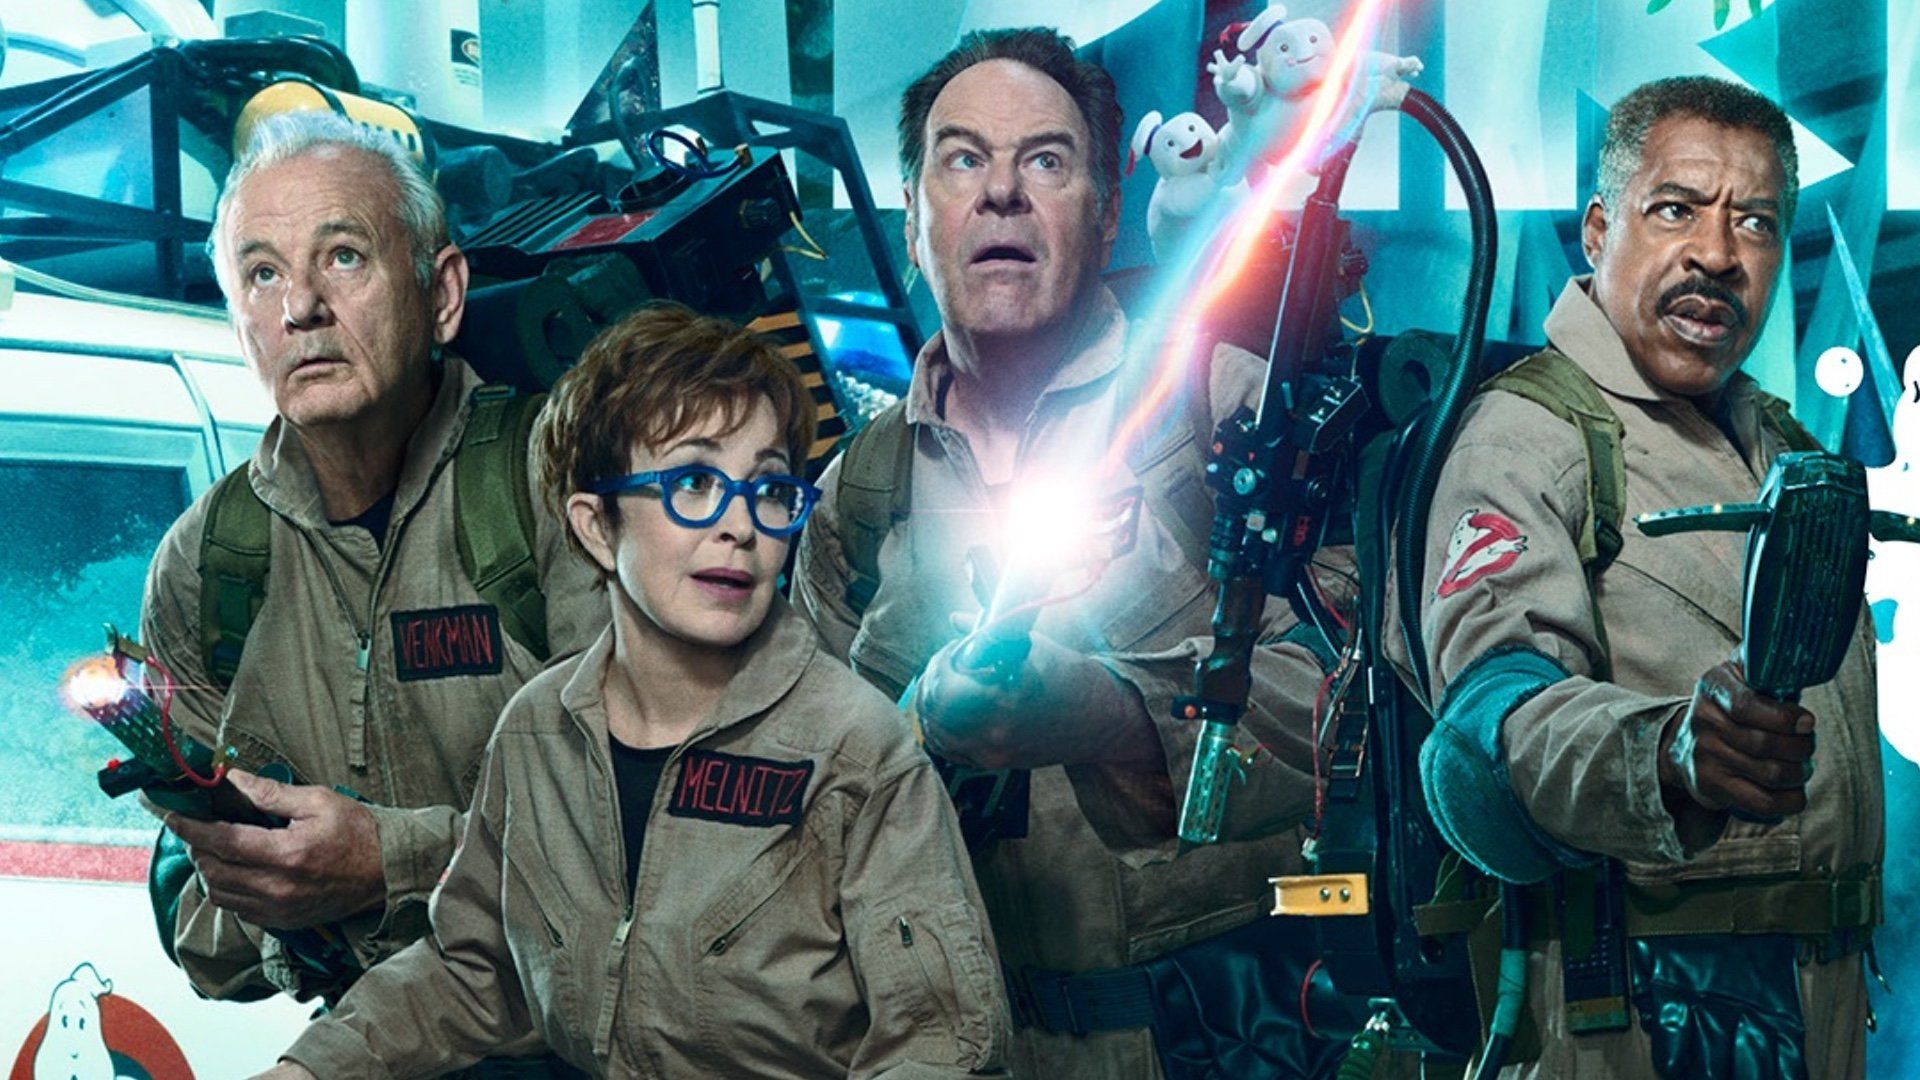 FLAWS: The latest Ghostbusters outing is enjoyable despite it weaknesses